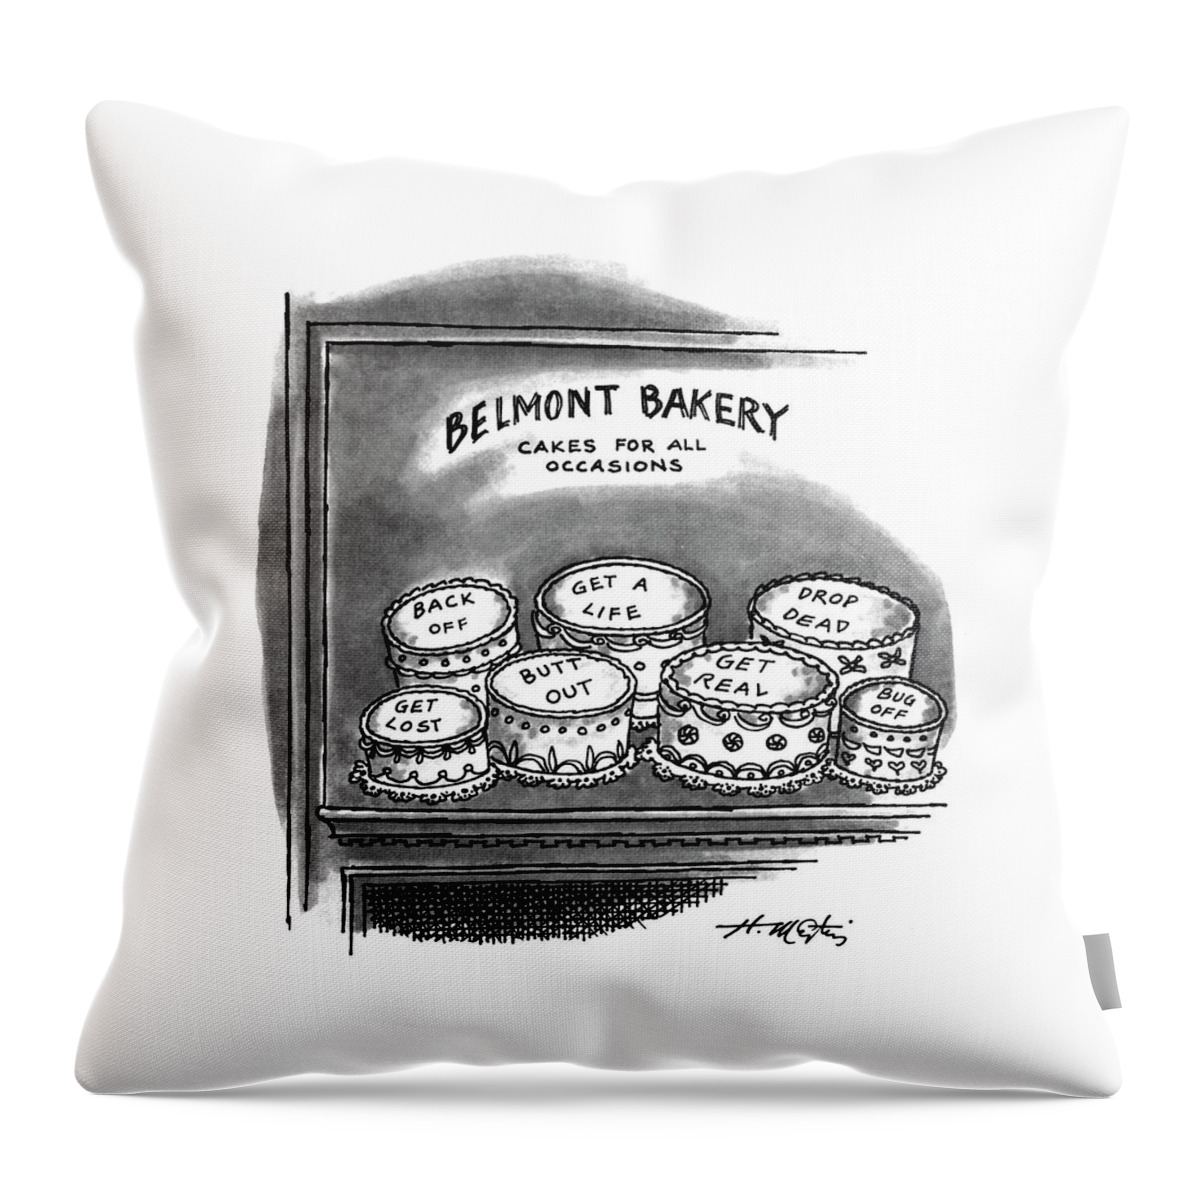 Belmont Bakery Cakes For All Occasions Throw Pillow